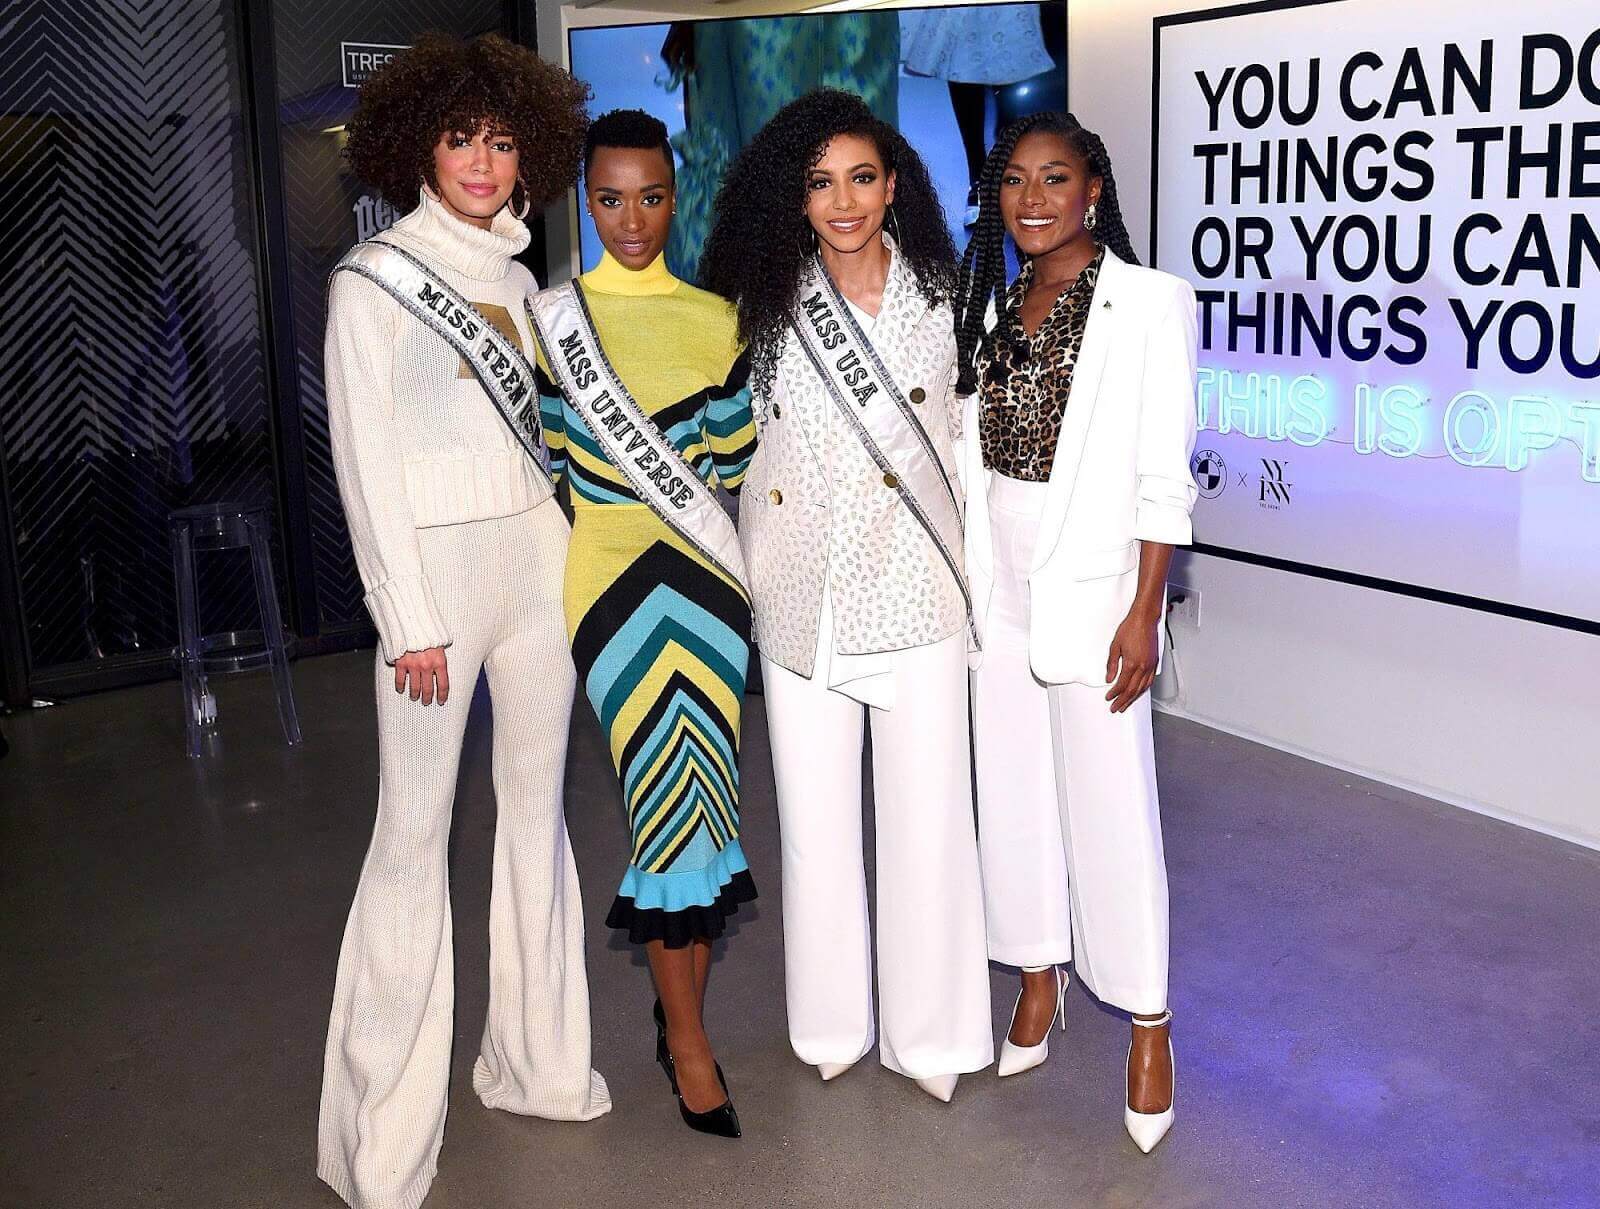 With Tunzi completing this trio, 2019 became the first year when all three “IMG queens,” as referred to within the pageant community, were Black women who won while wearing their natural hair.